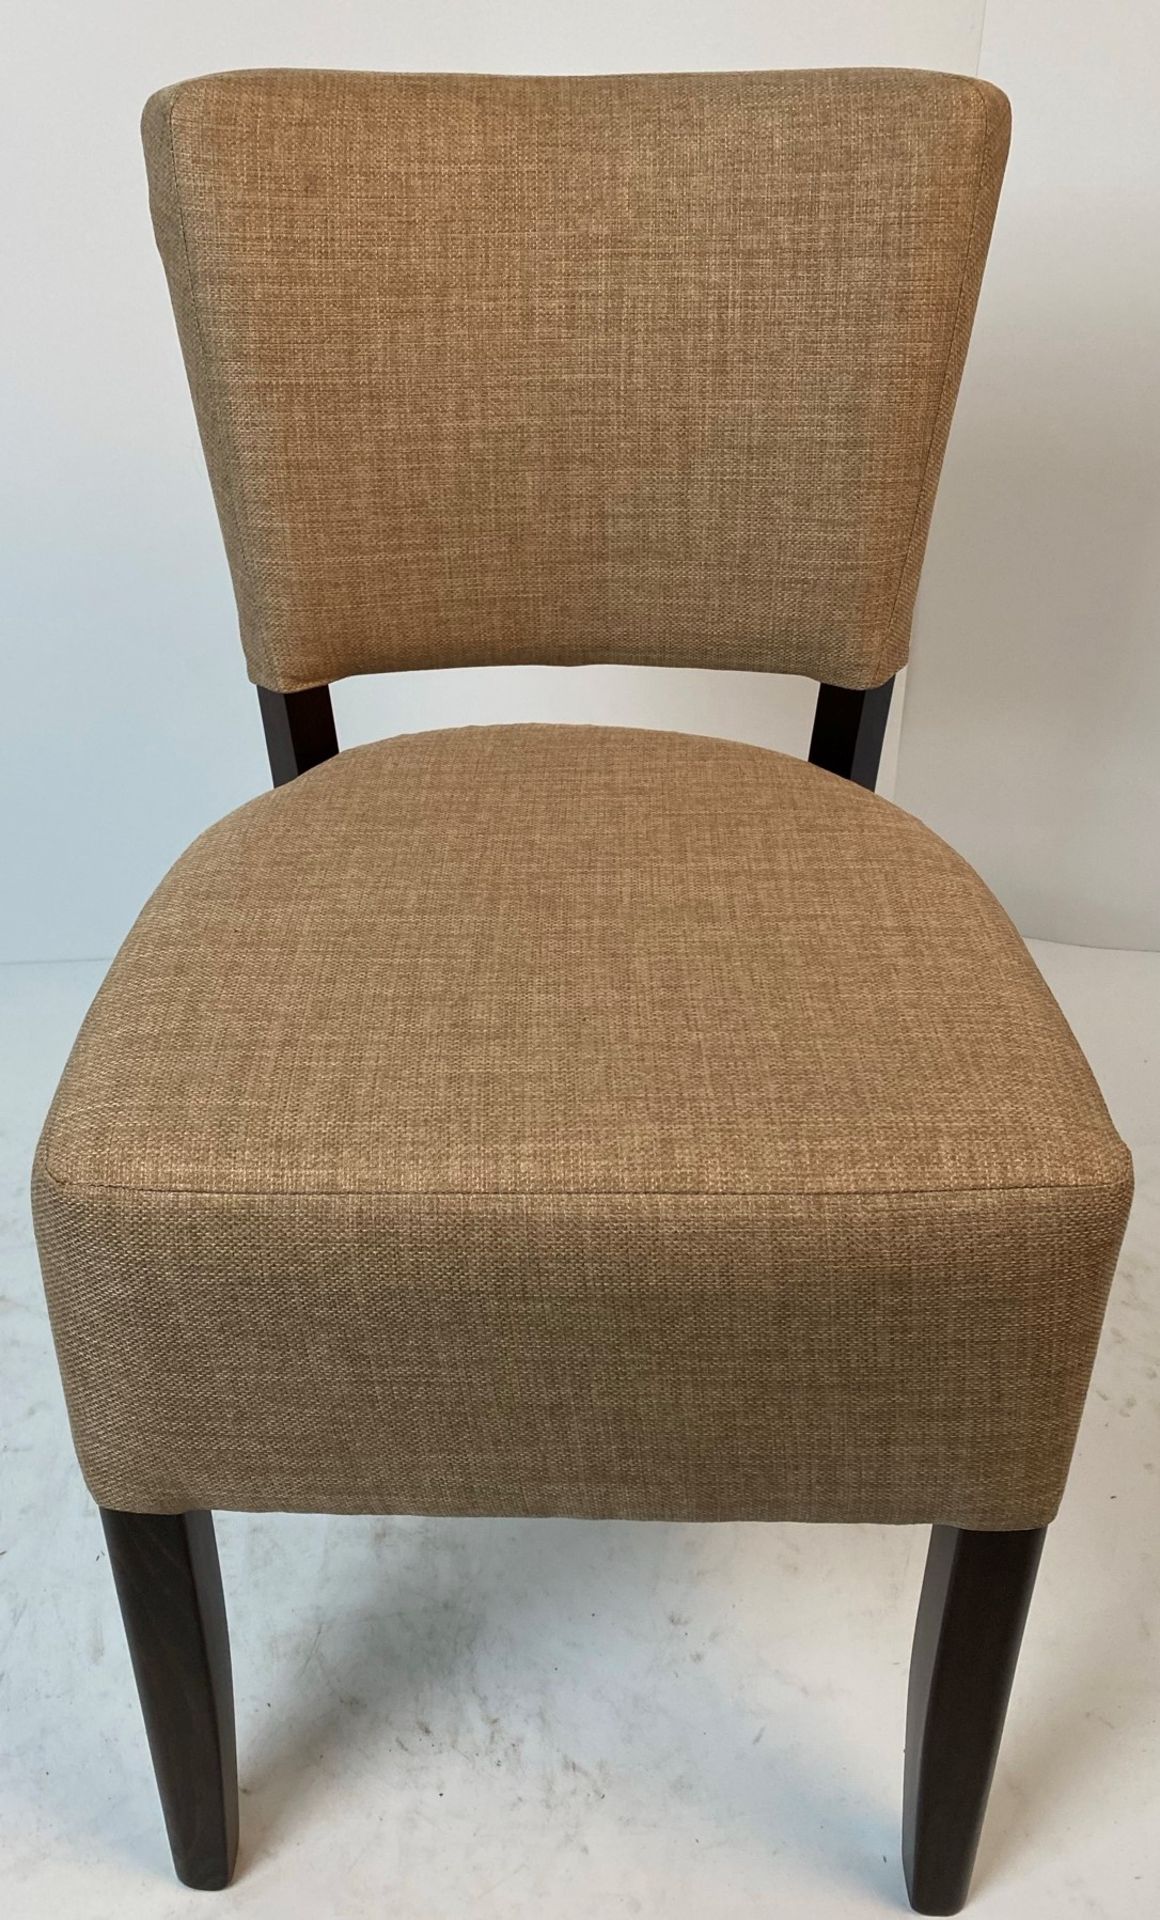 A Memphis Agua Linetta Sand side/dining chair with walnut coloured frame